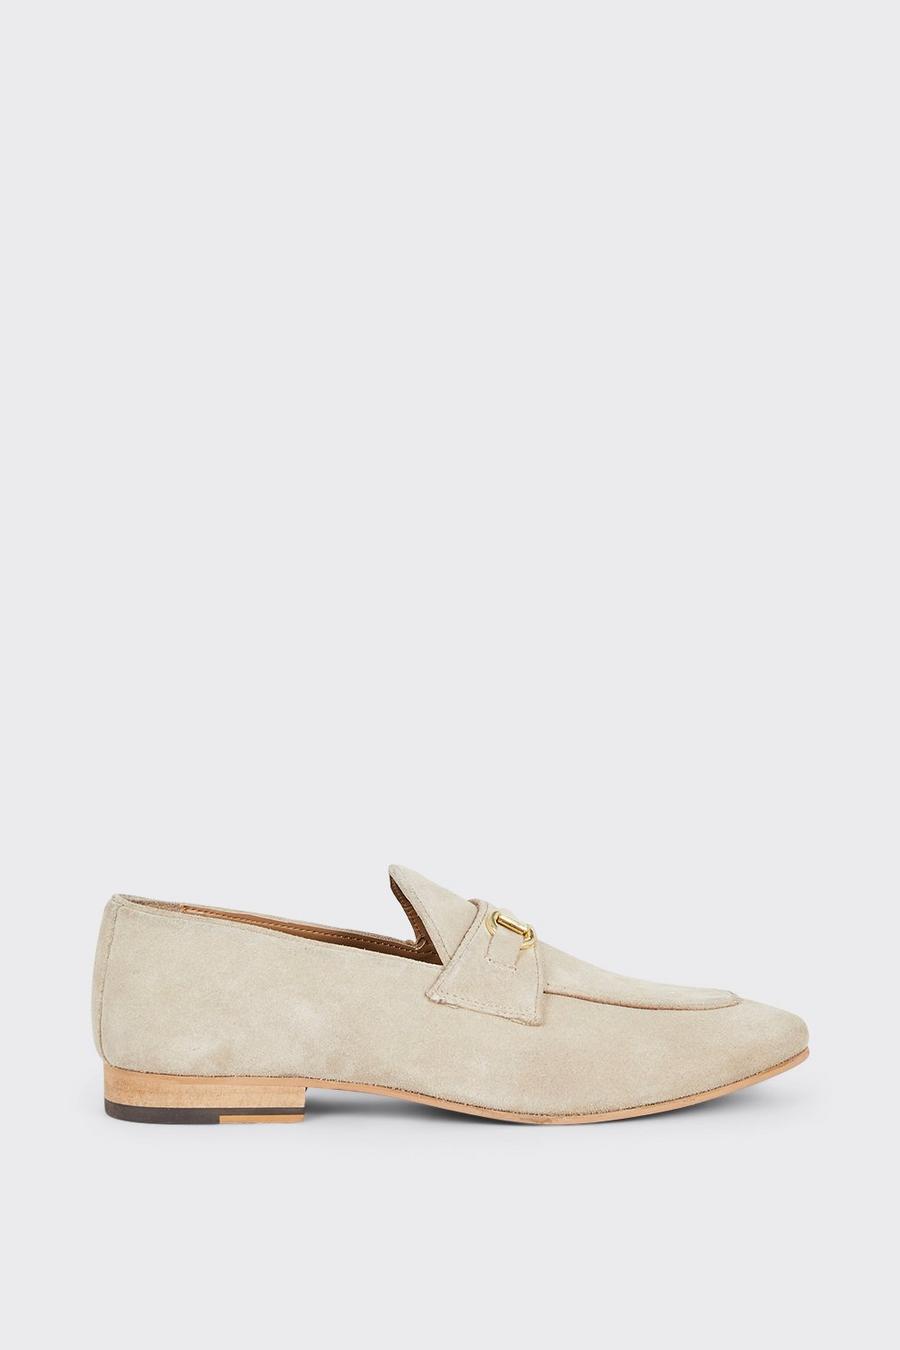 Stone Suede Saddle Loafers